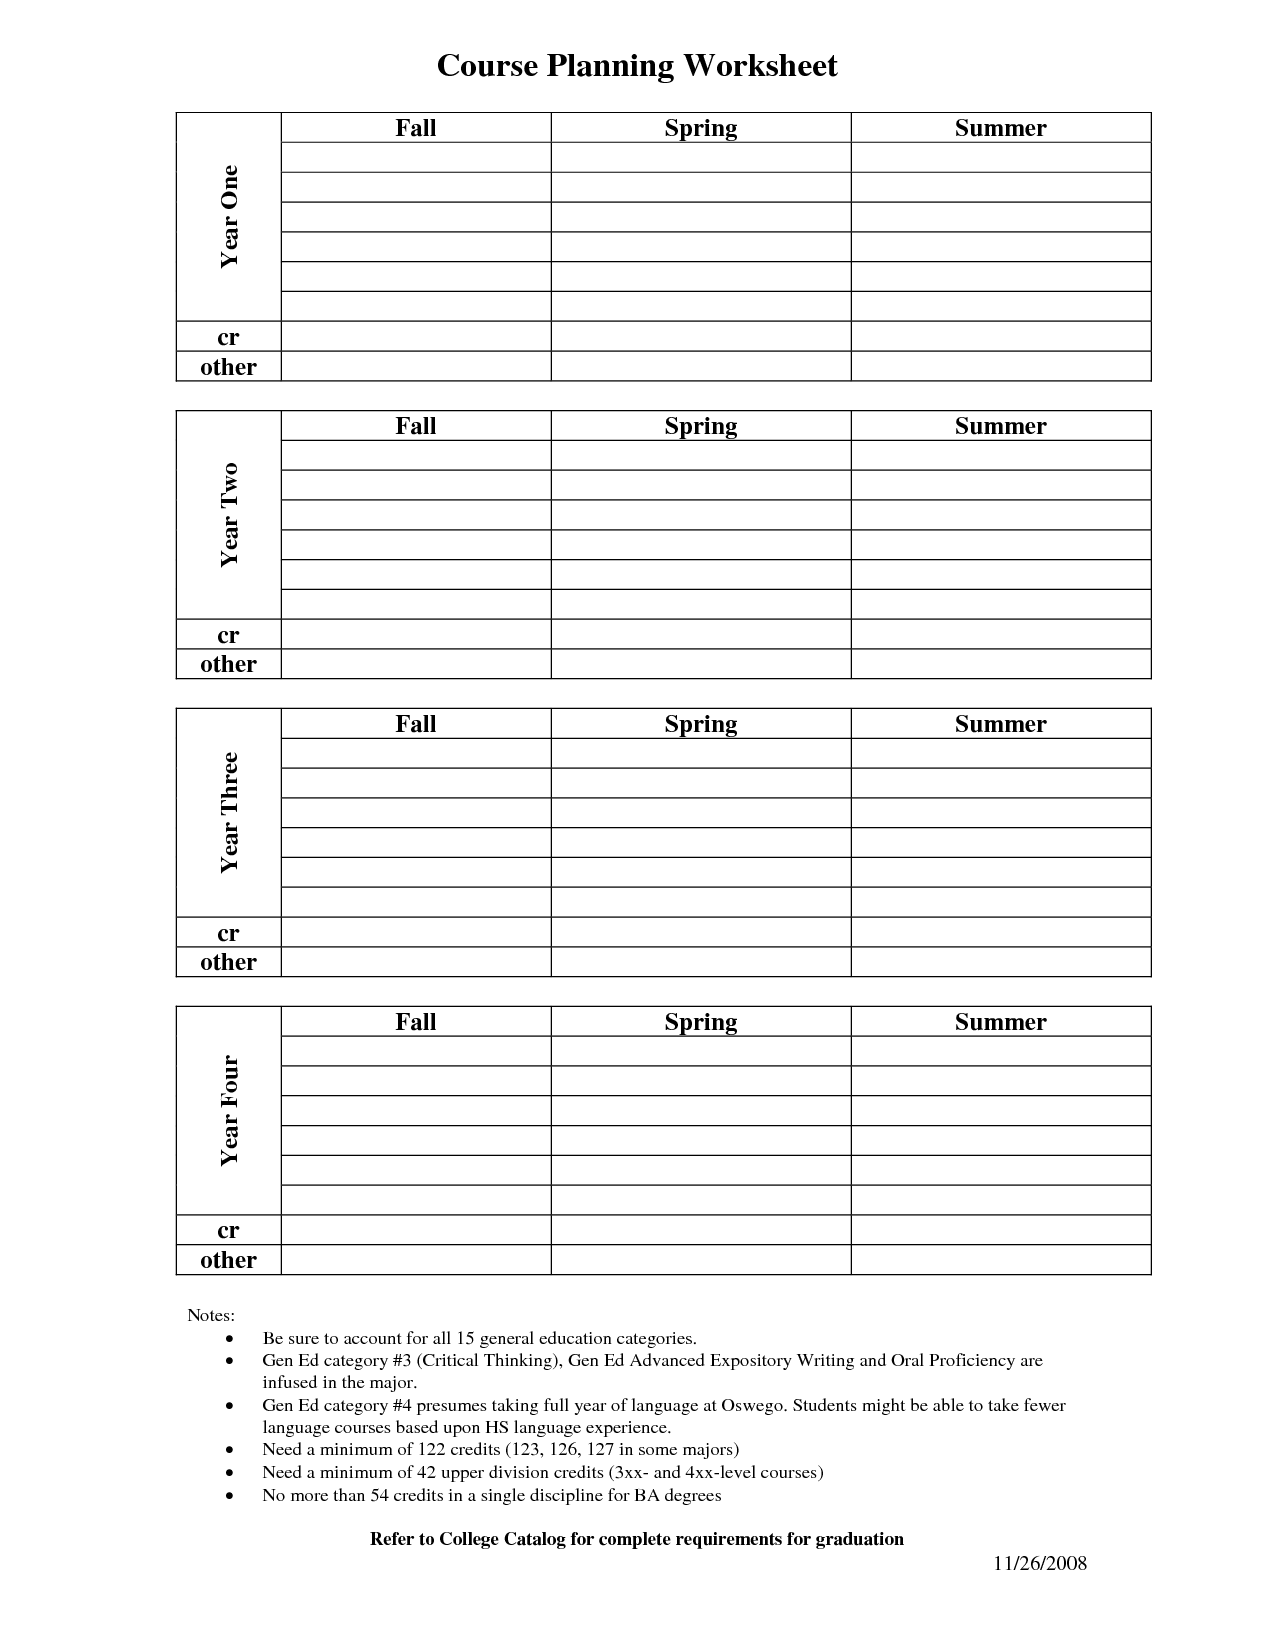 College Course Planning Worksheet